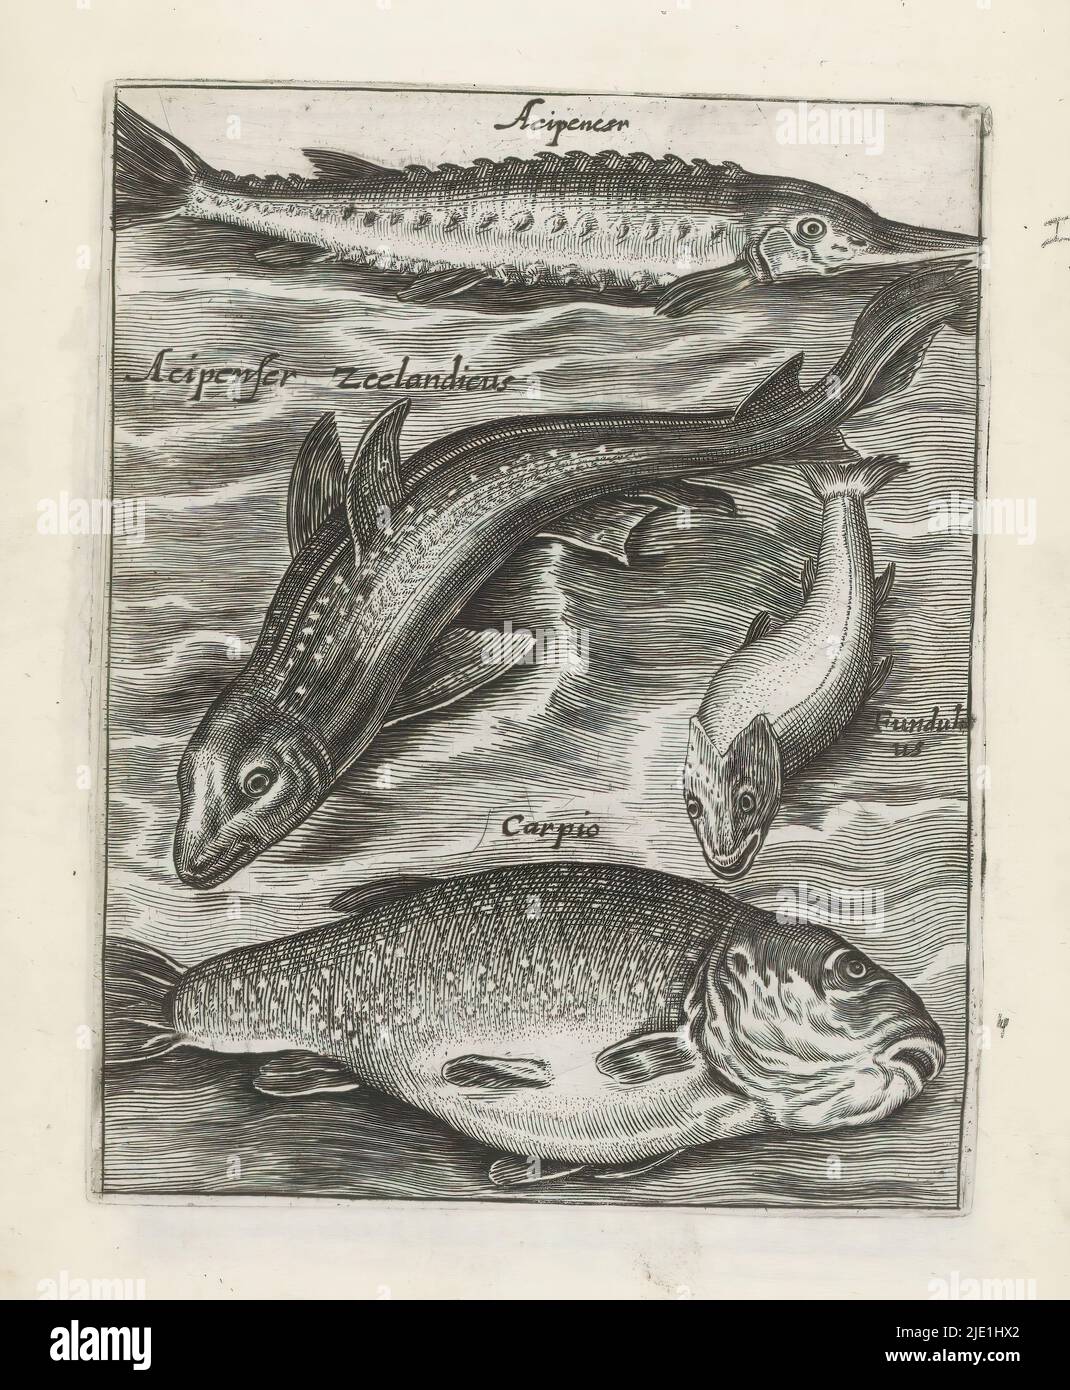 Sturgeon, fundulus and carp, Fish (series title), Piscium Vivae Icones (series title), Four fish. From top to bottom a sturgeon, Zealand sturgeon, a fundulus and carp. Each fish has its name in Latin. This print is part of an album., print maker: anonymous, print maker: Crispijn van de Passe (I), (rejected attribution), after design by: Adriaen Collaert, Utrecht, 1635 - 1660, paper, engraving, height 119 mm × width 94 mm Stock Photo